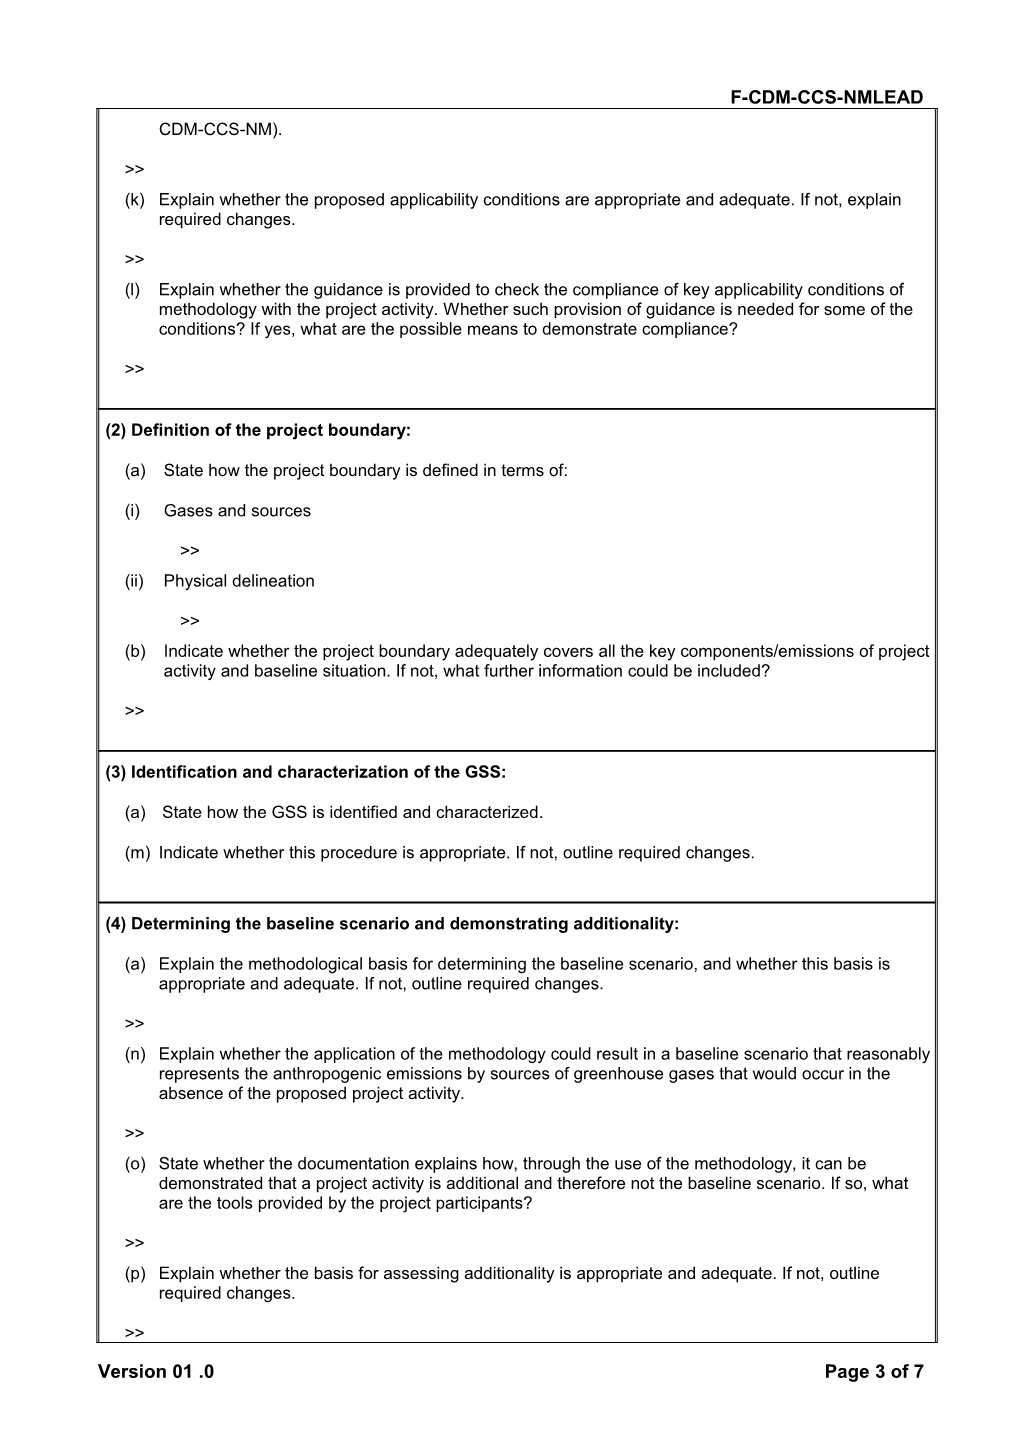 F-CDM-CCS-NMLEAD: Expert Assessment Form for Proposed New Methodology for CCS CDM Project